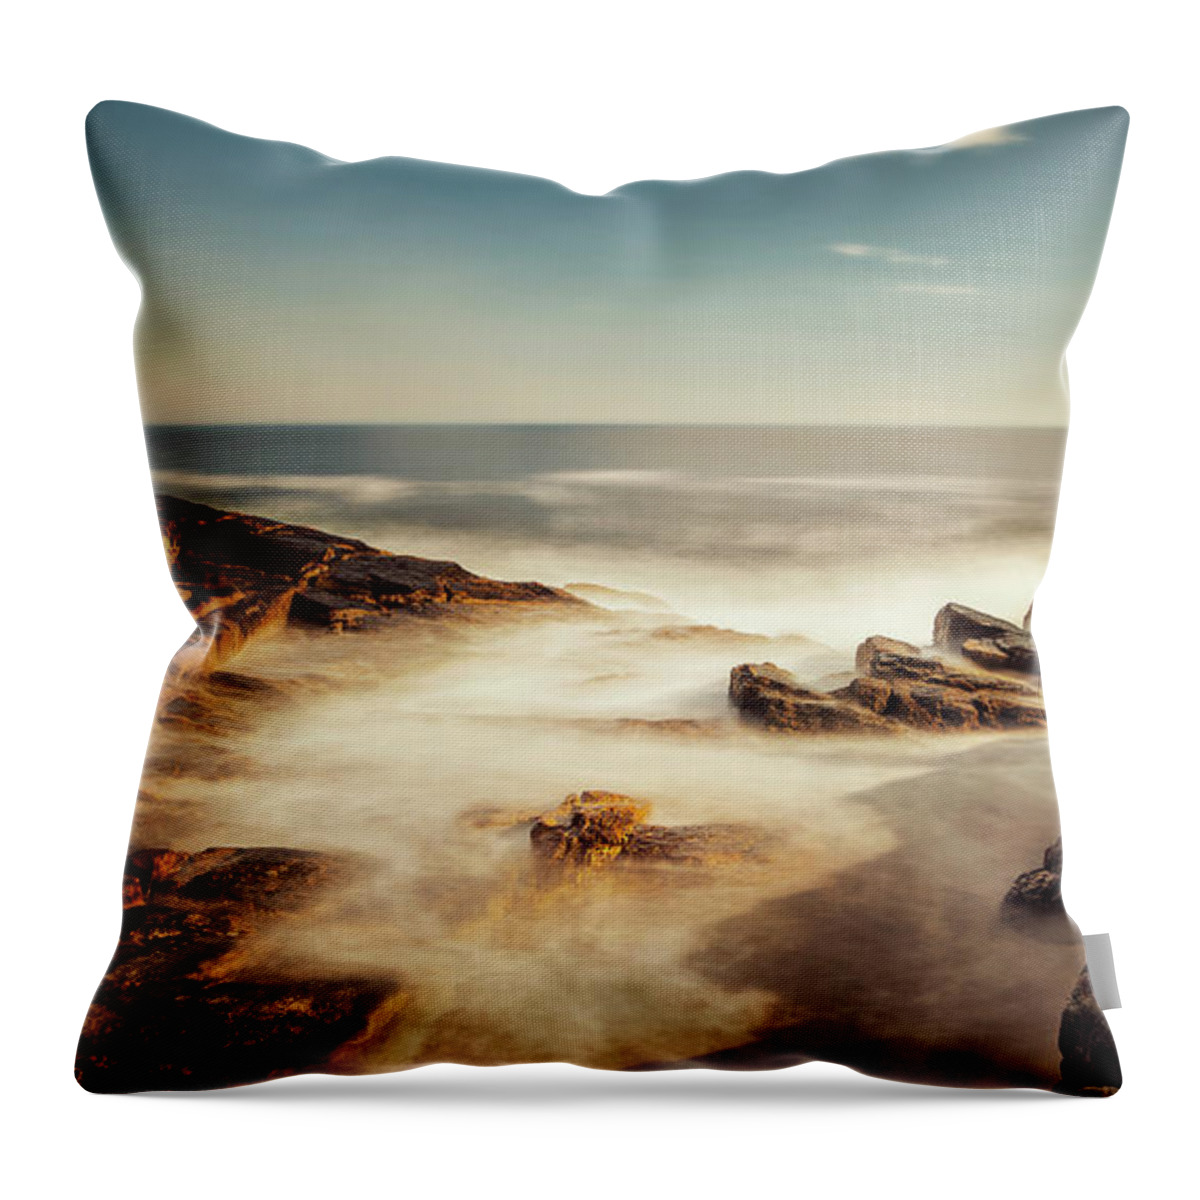 Scenics Throw Pillow featuring the photograph Enclosed by Yugus